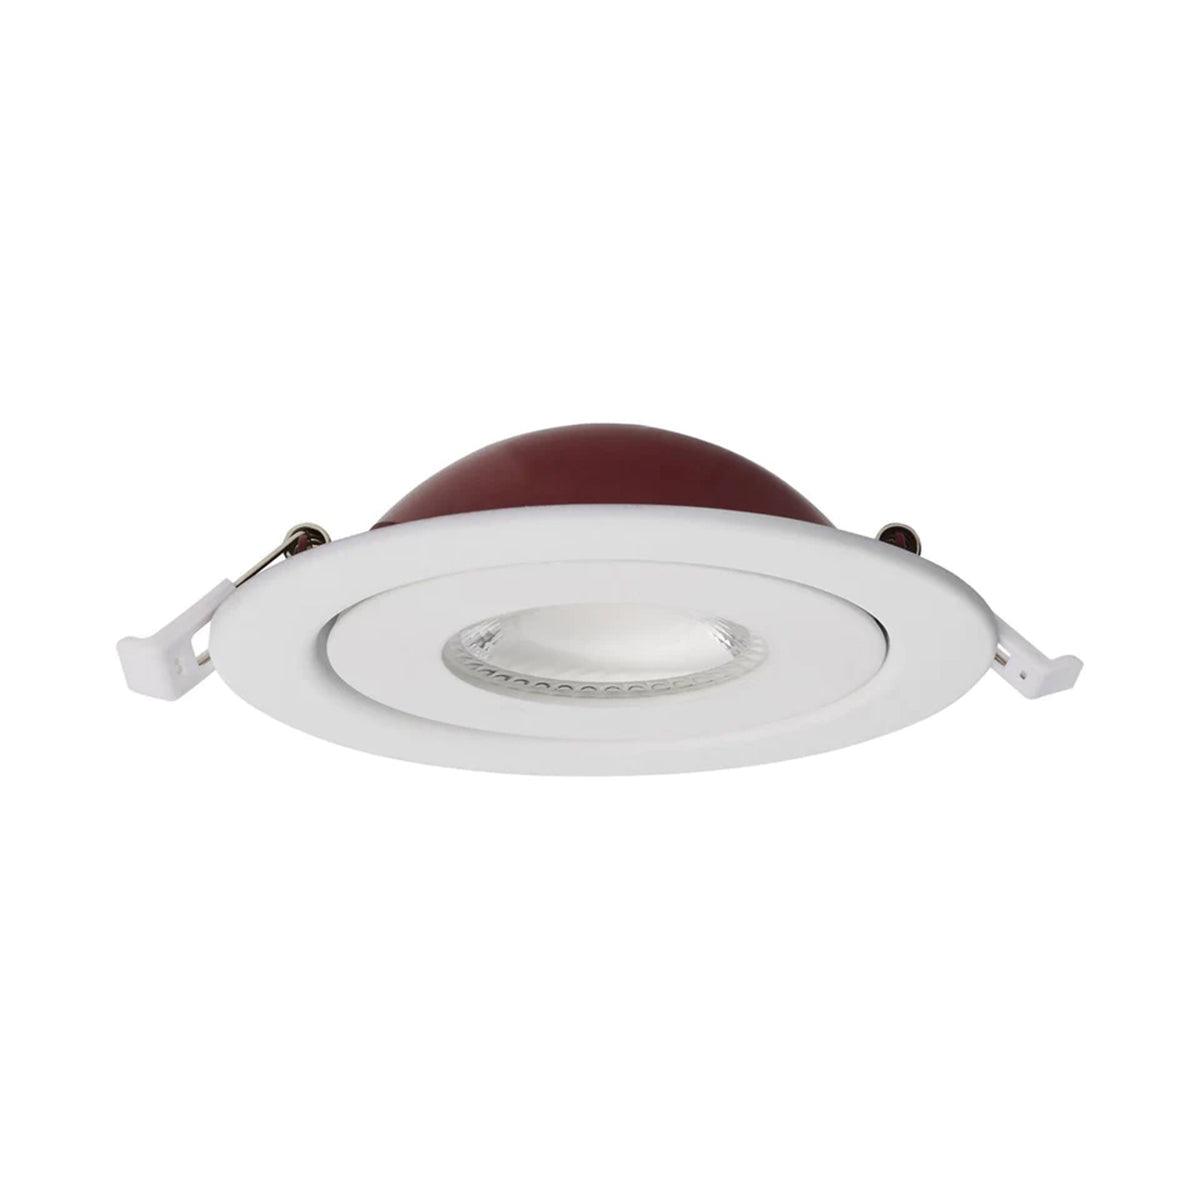 4 Inch Round LED Fire Rated Directional Downlight, 9 Watt, 650 Lumens, Selectable CCT 2700K to 5000K, Adjustable Trim